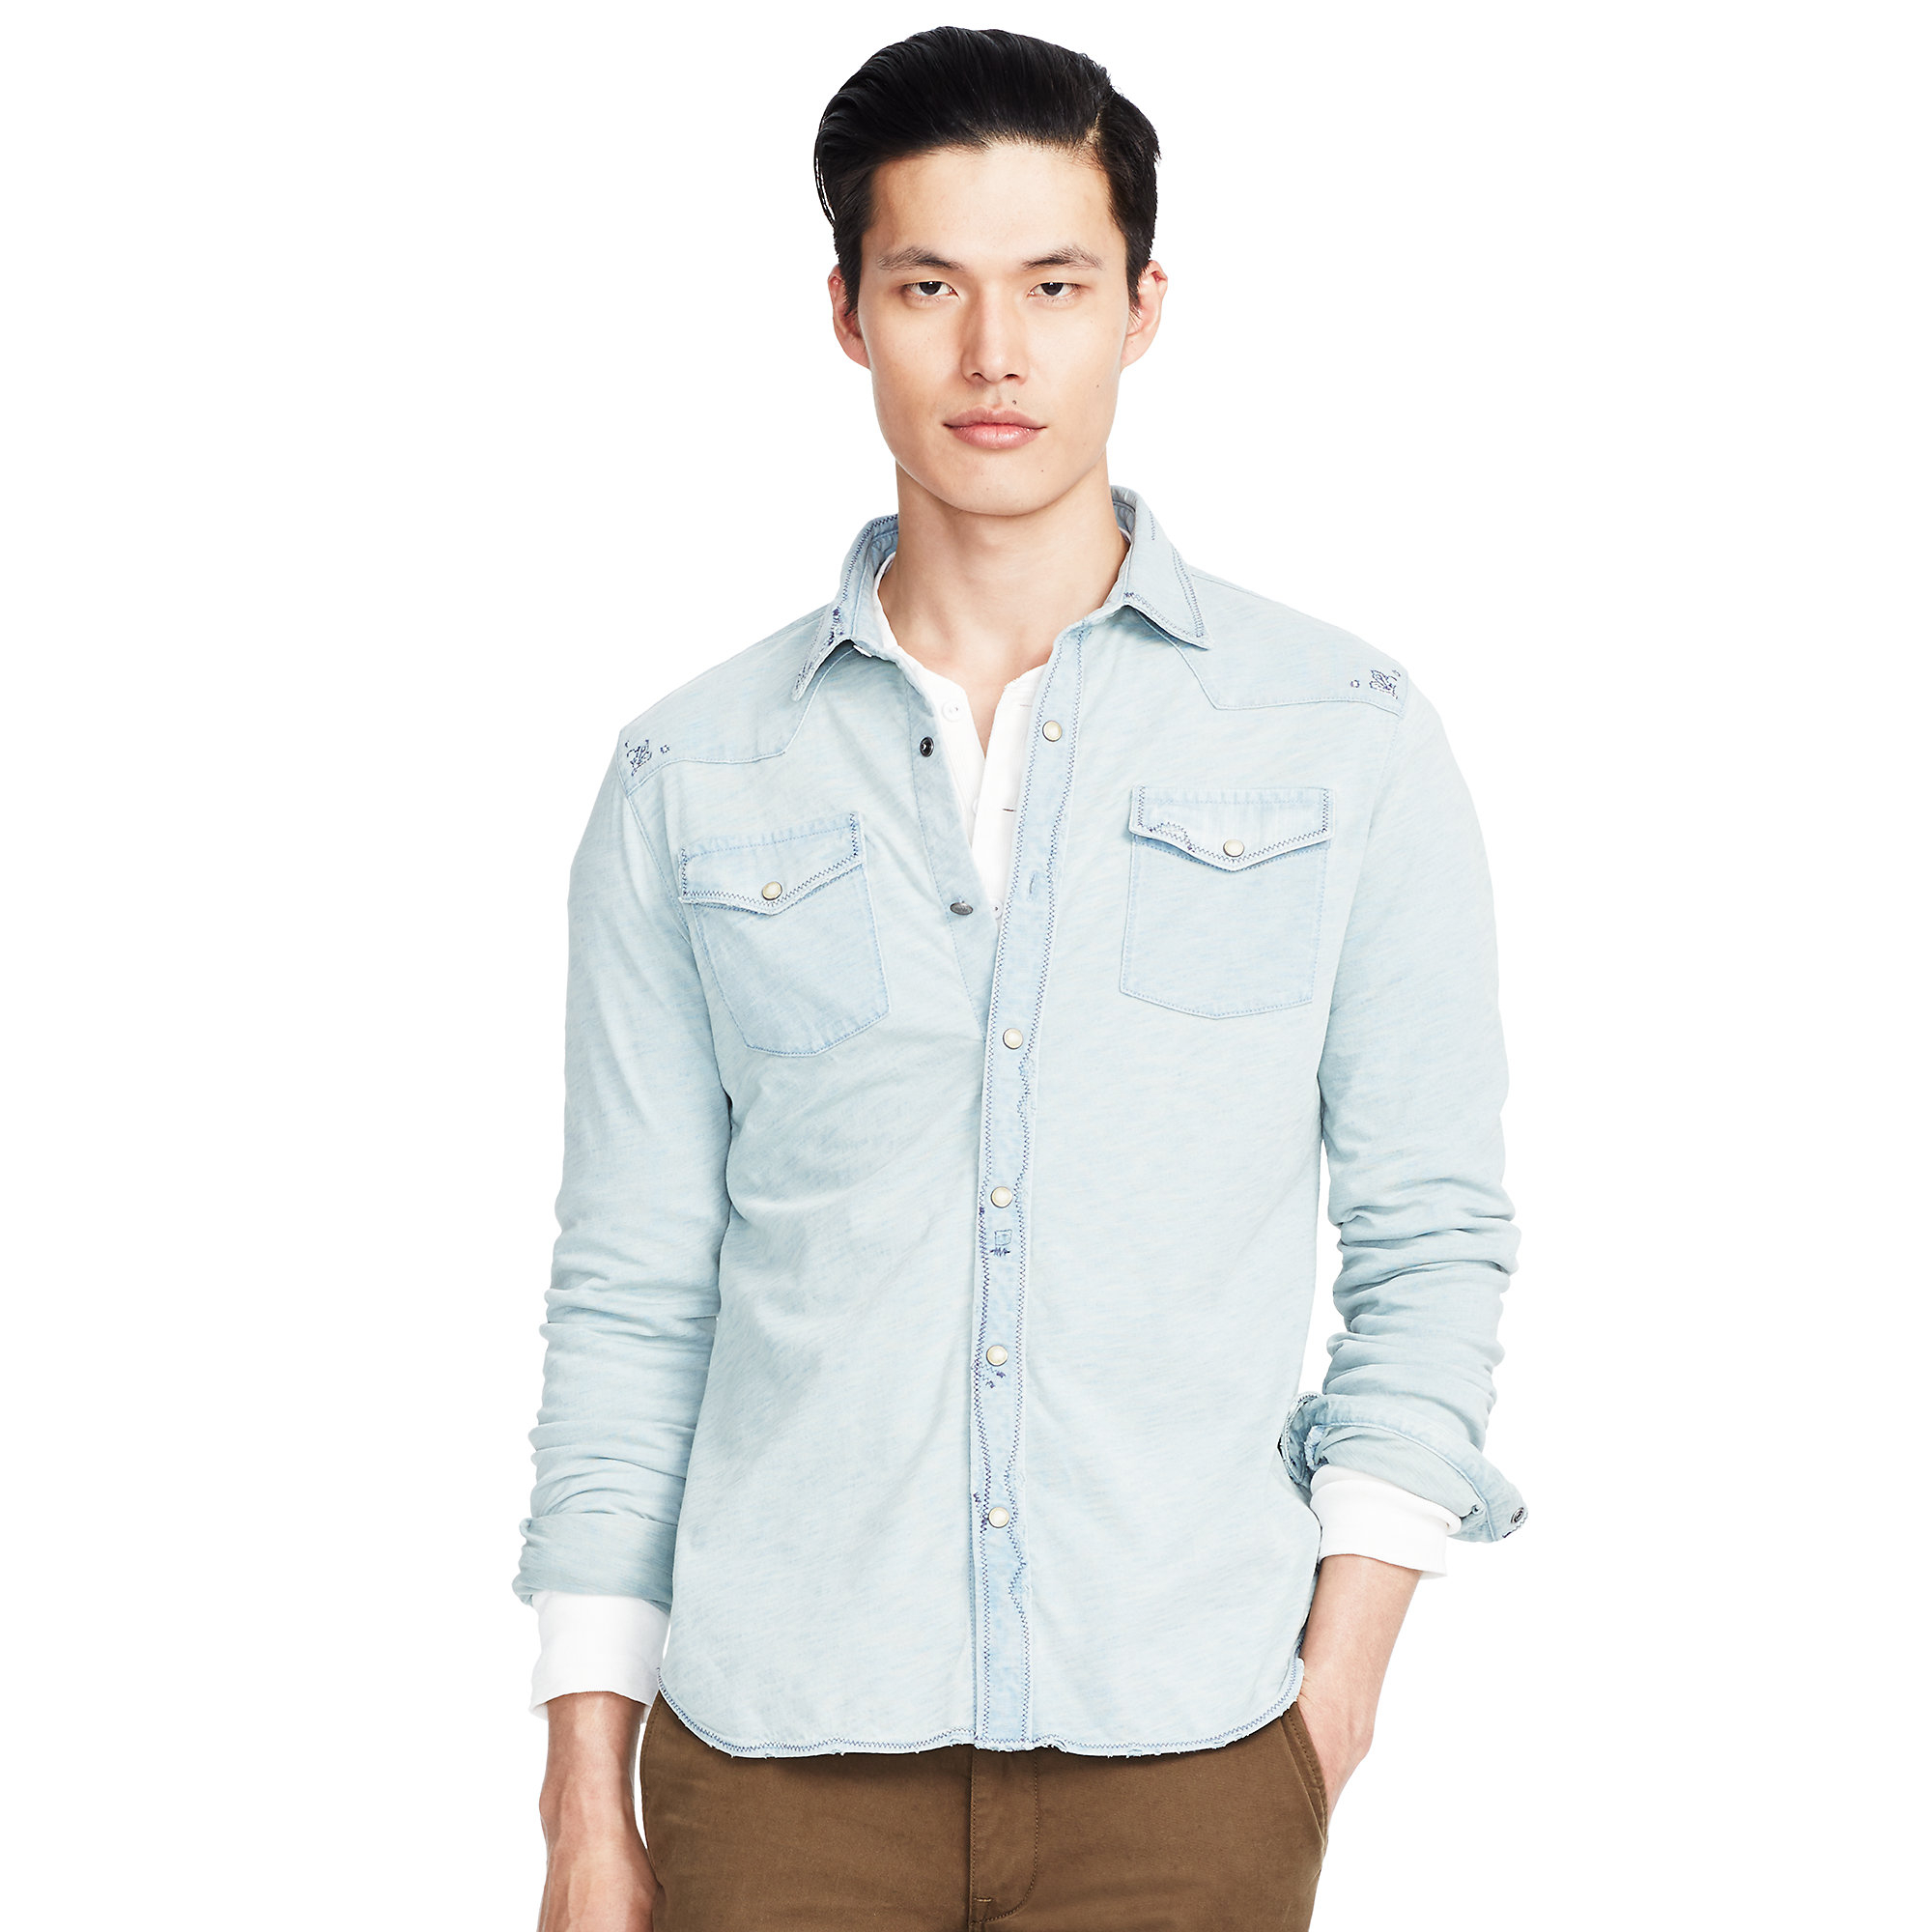 Lyst - Polo Ralph Lauren Washed Jersey Western Shirt in Blue for Men